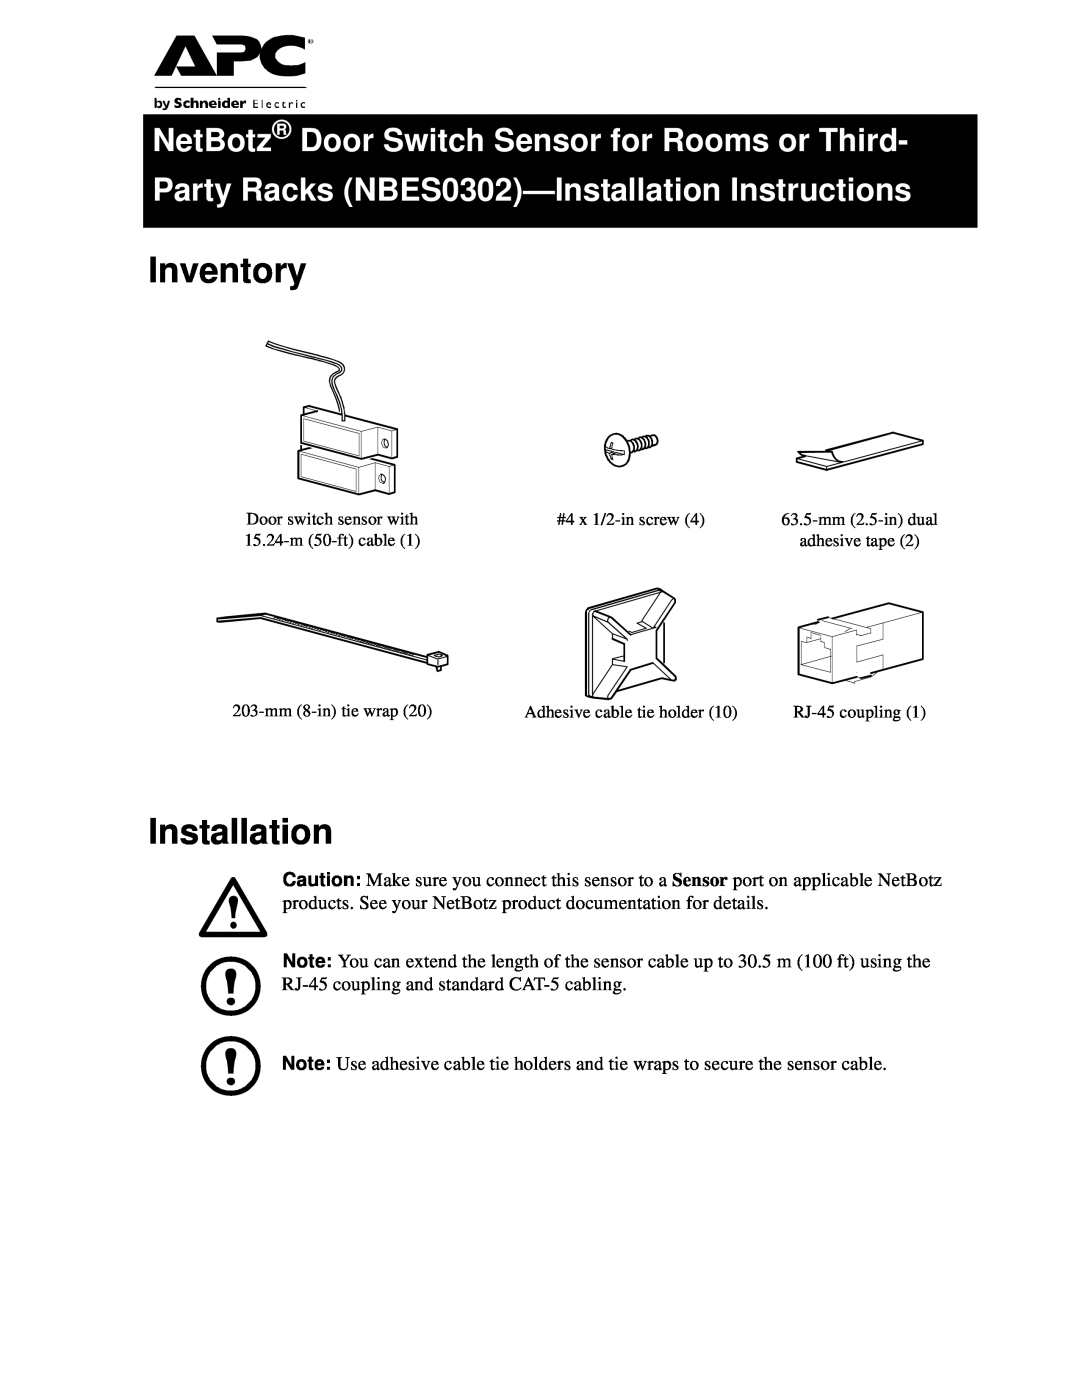 APC NBES0302 installation instructions Inventory, Installation, Door switch sensor with, #4 x 1/2-in screw, mm 2.5-in dual 